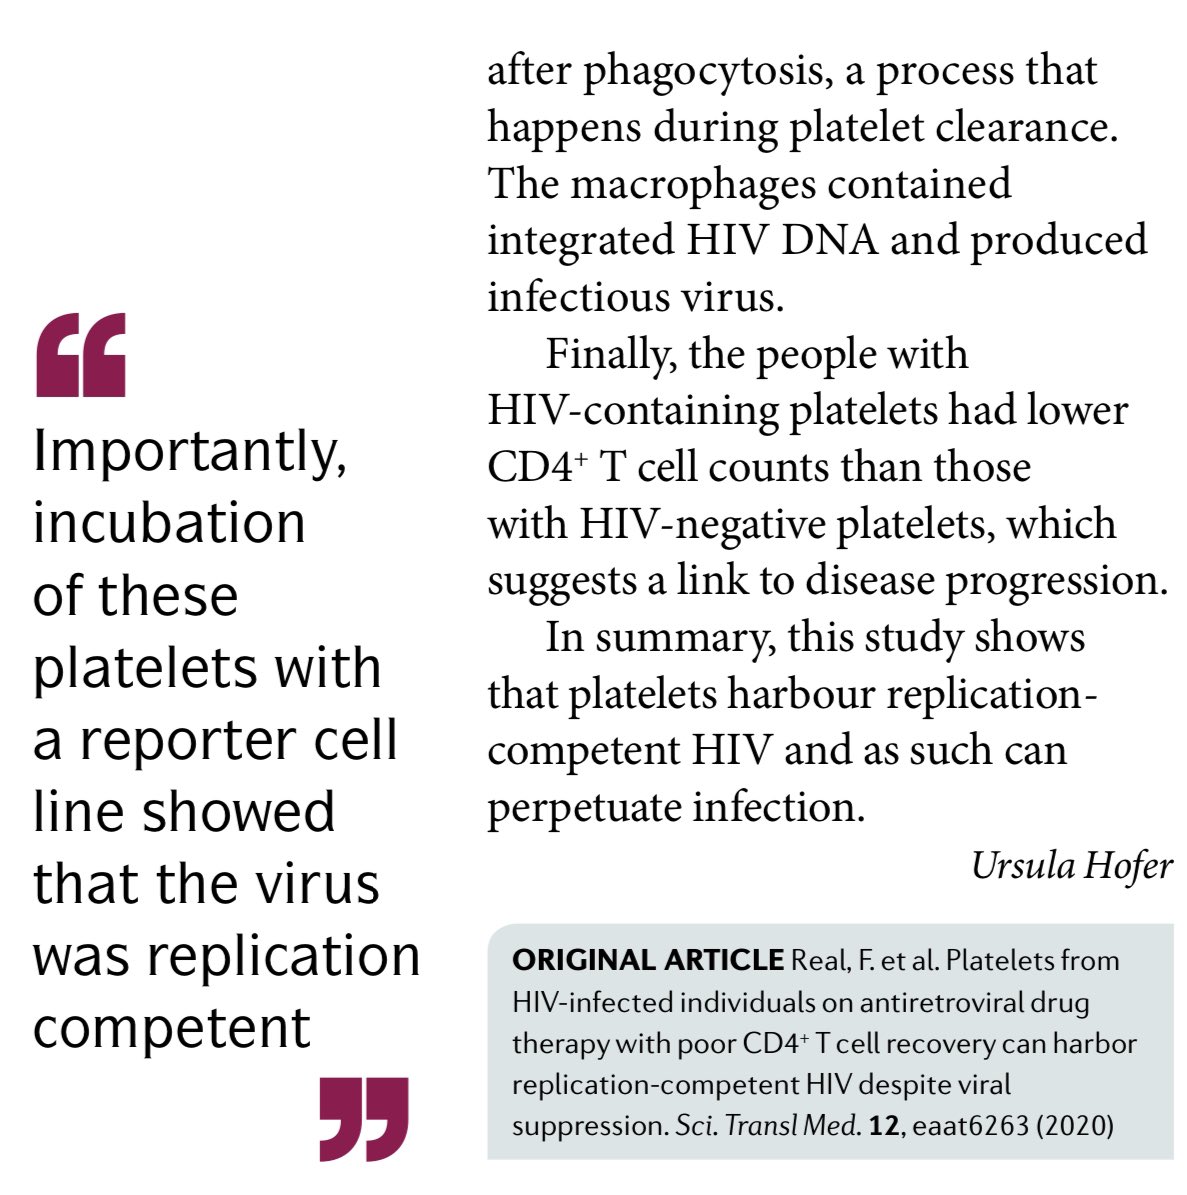 That SARS-CoV-2 is now confirmed to infect megakaryocytes long-term (studied in Long Covid patients) should definitely alarm the public health authorities everywhere. Intent is not to doom tweet here. But we should tackle this like we did for HIV. You can replace HIV with